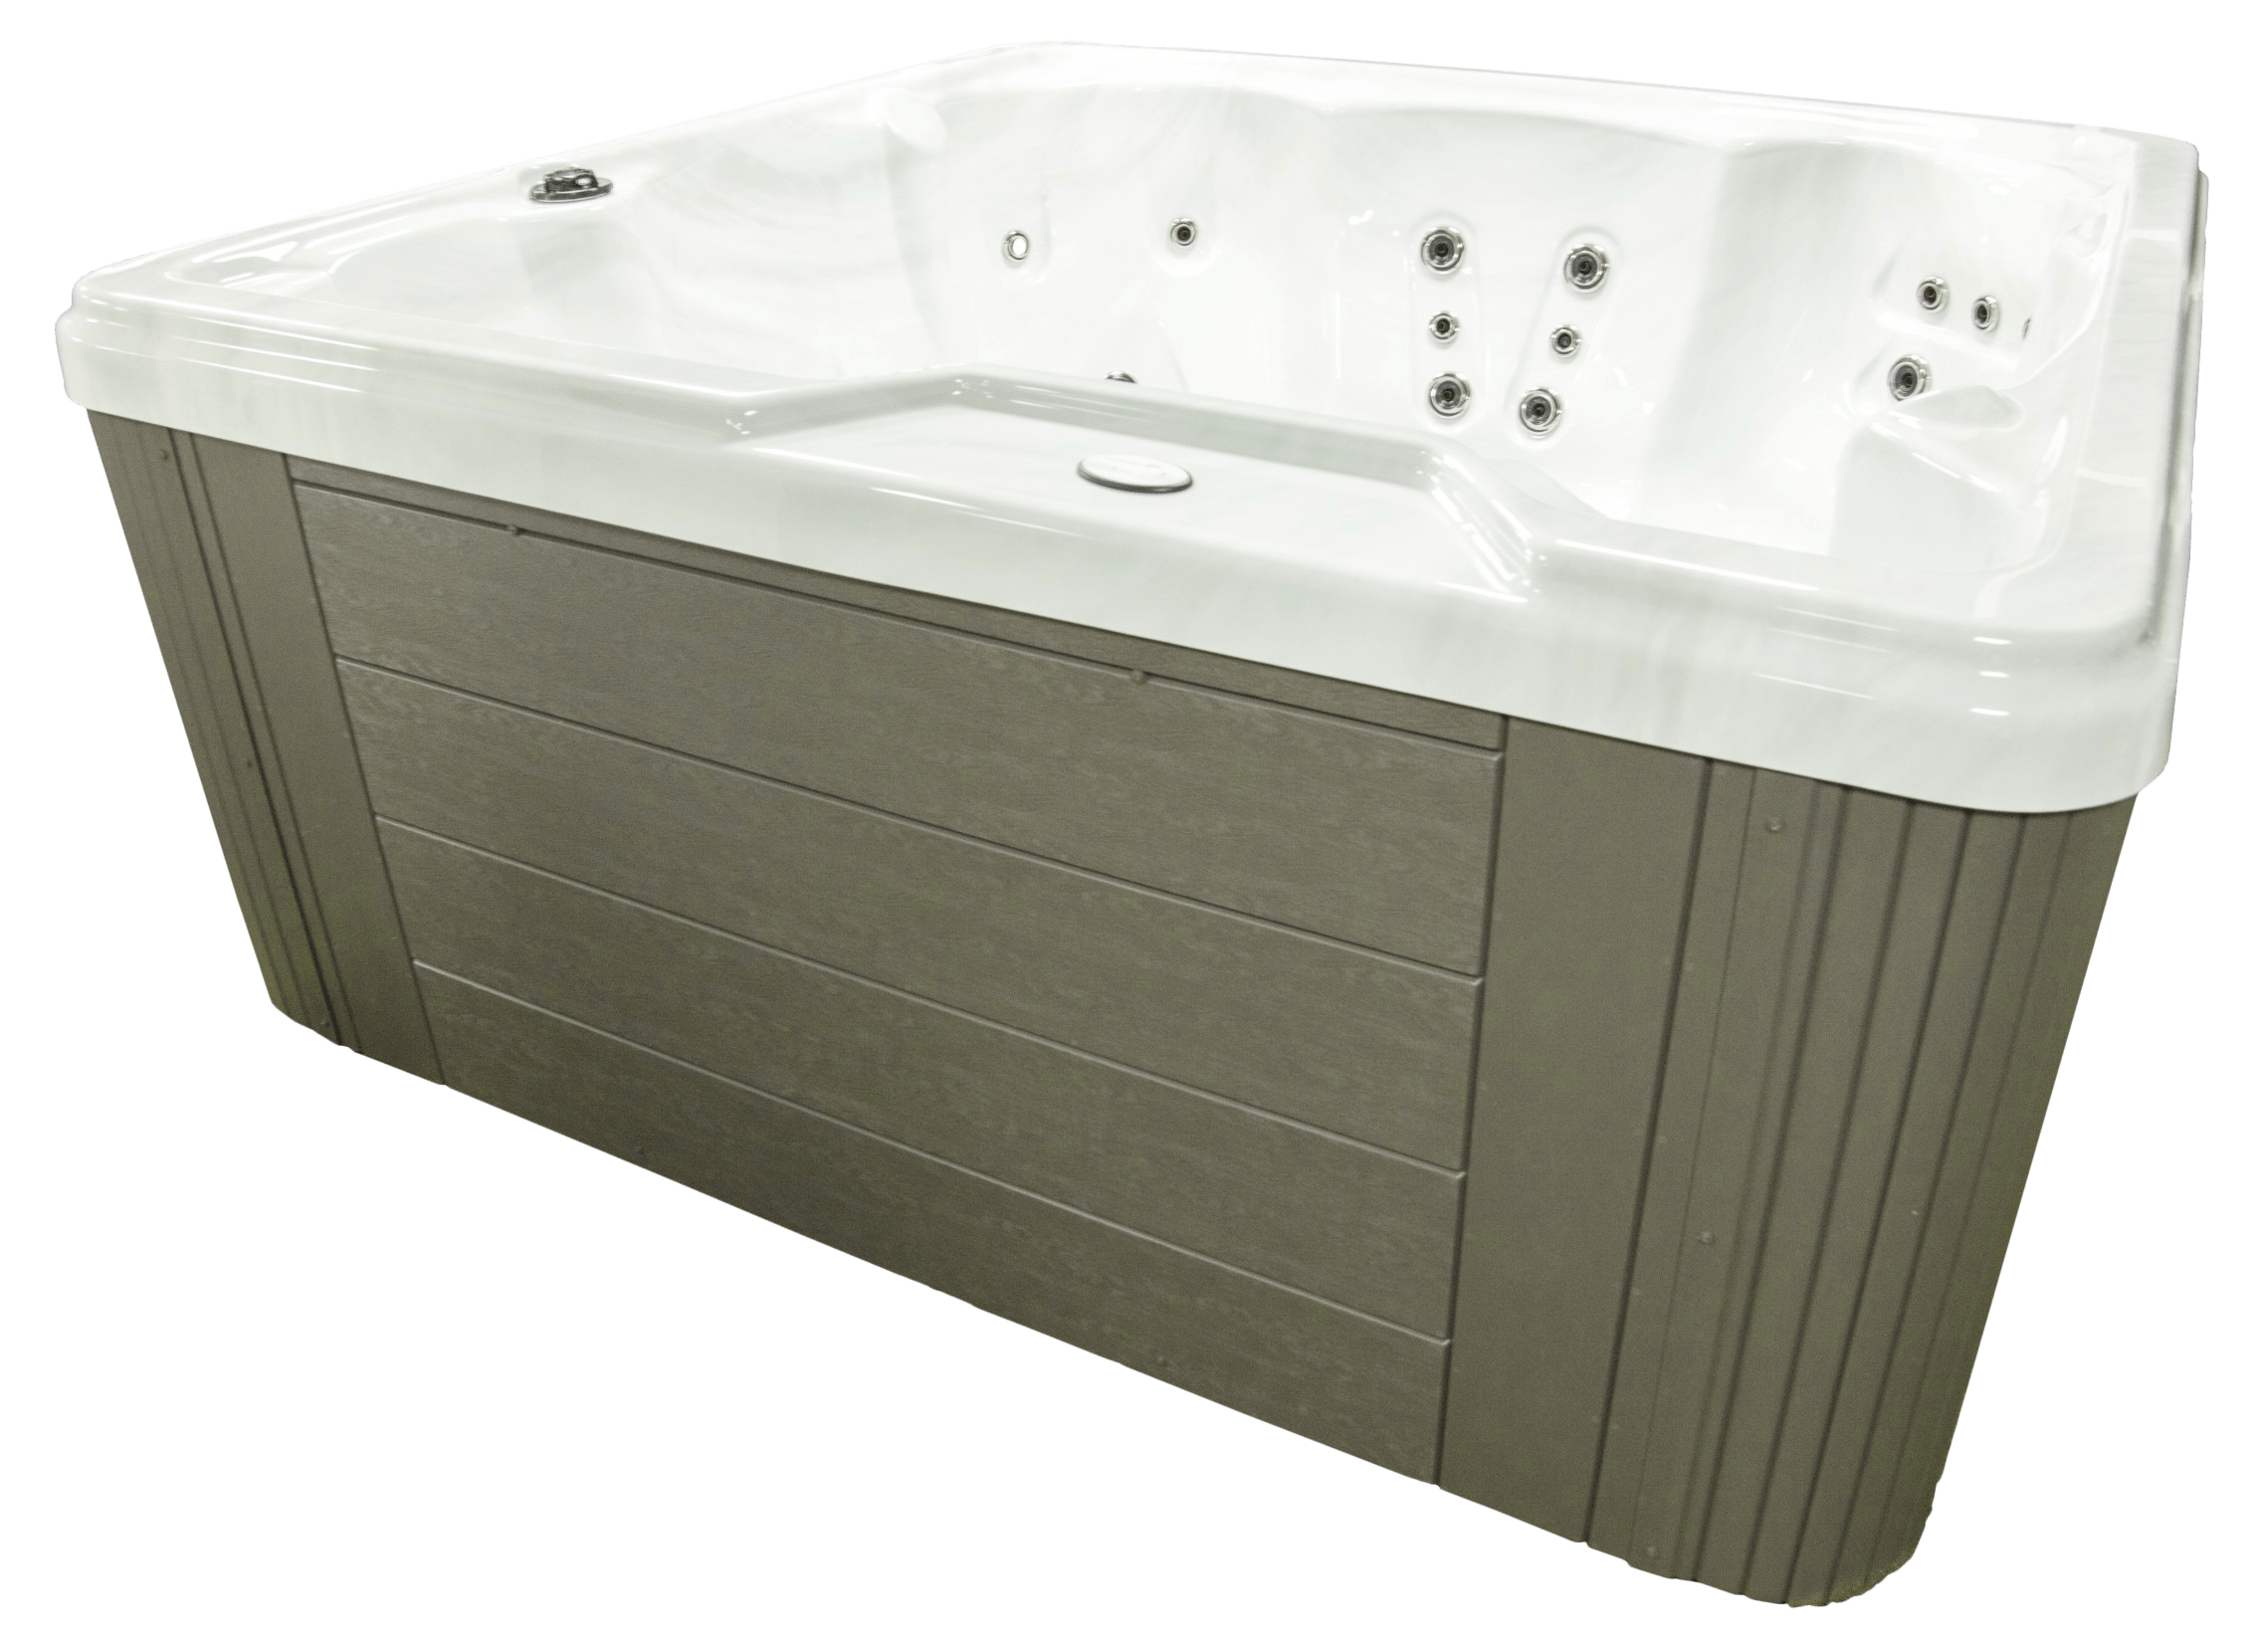 holiday let spa side panels